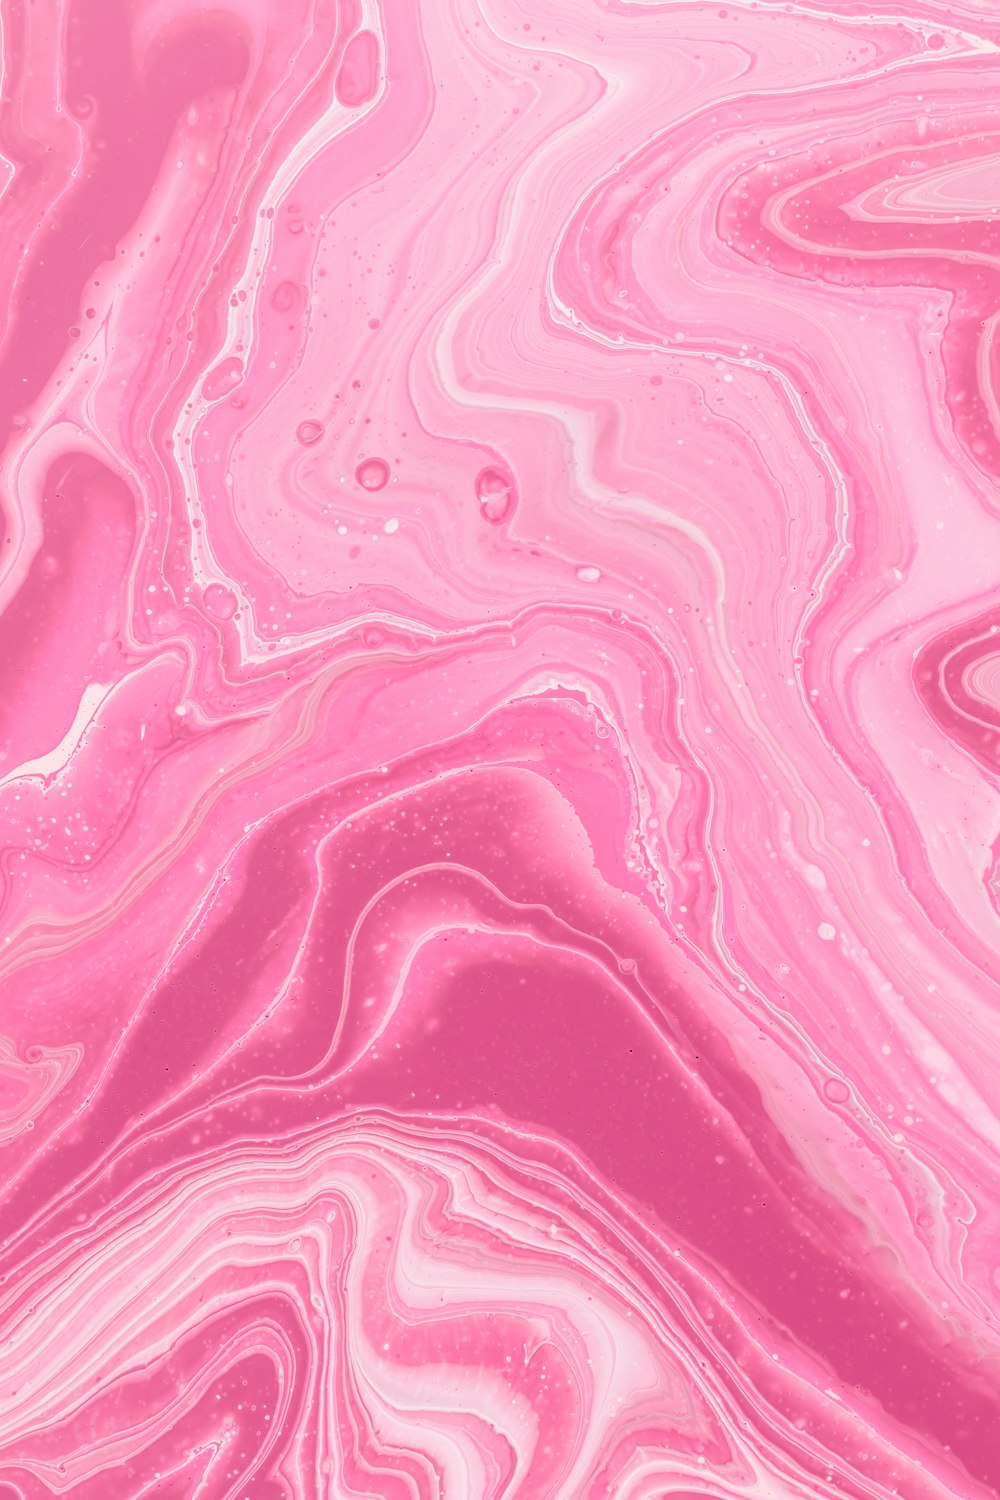 1K+ Pink Abstract Pictures | Download Free Images on Unsplash